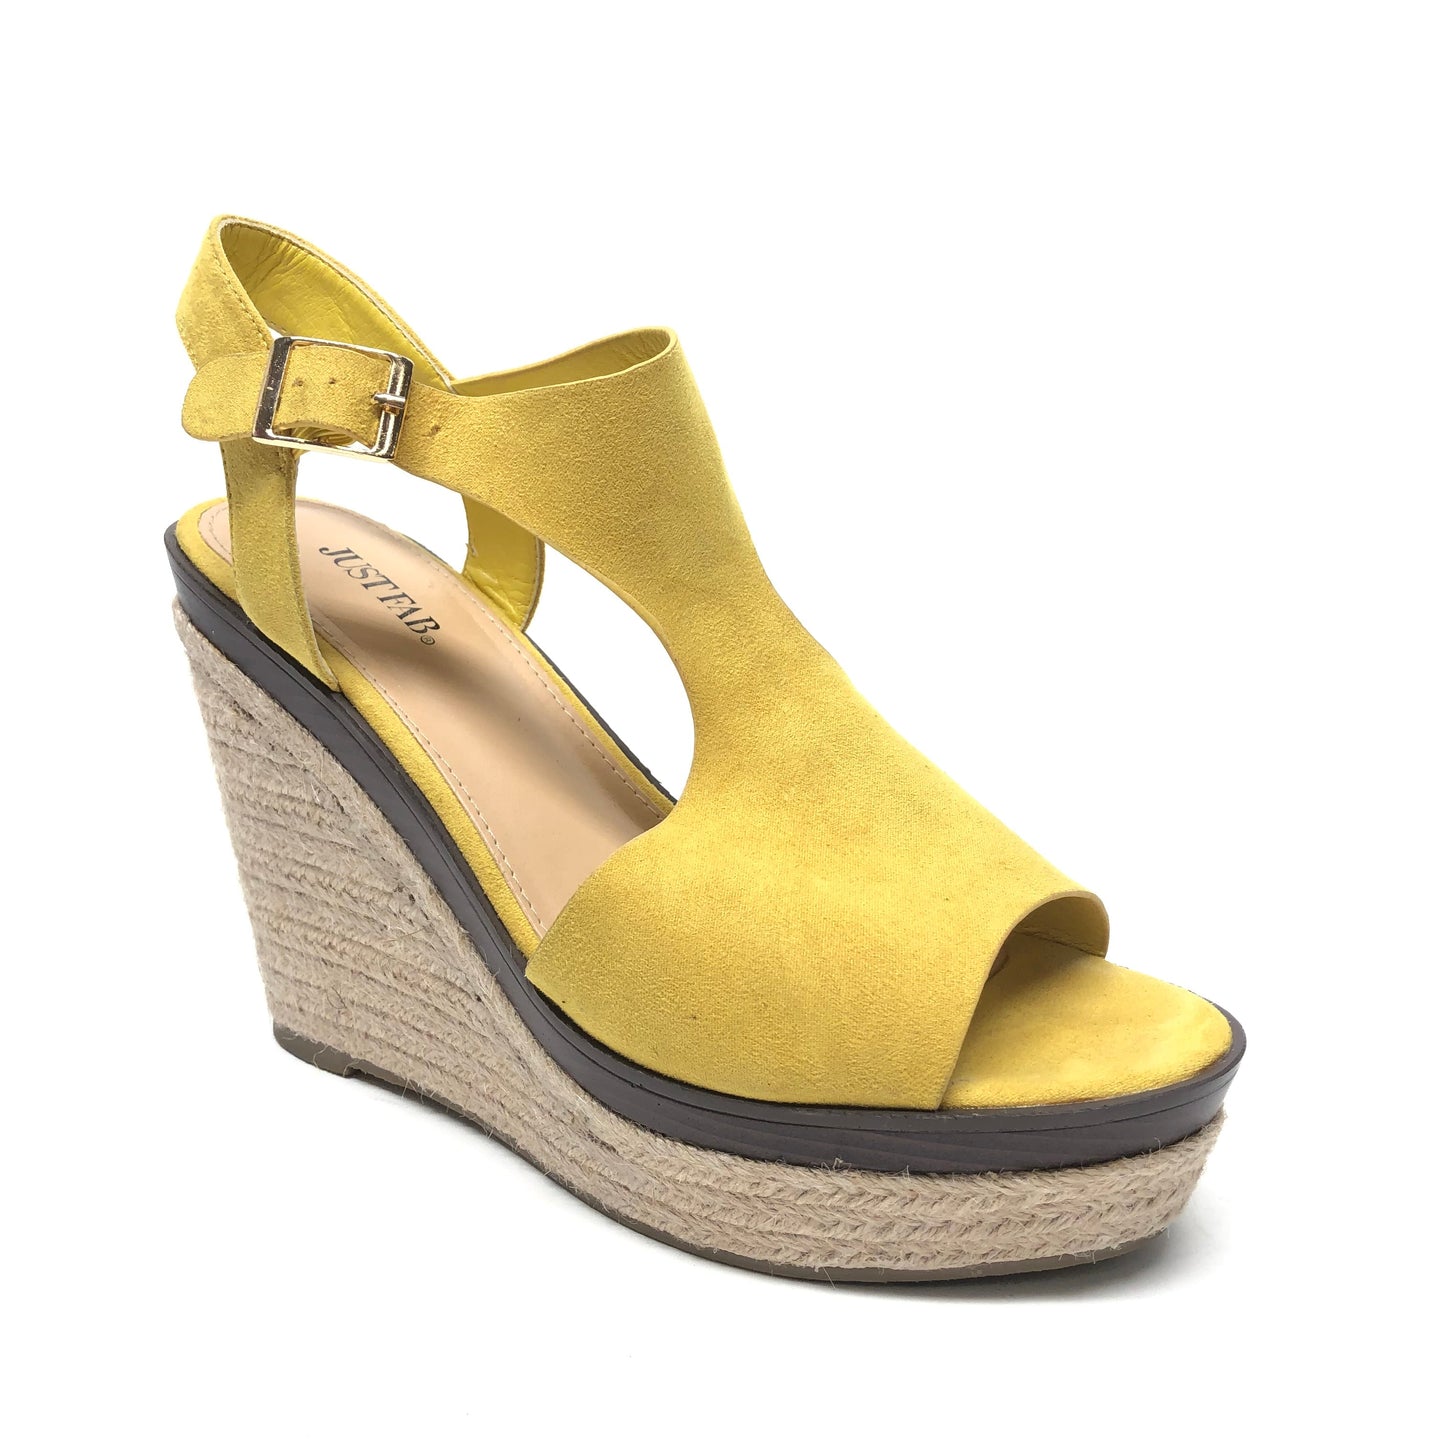 Yellow Sandals Heels Wedge Just Fab, Size 11